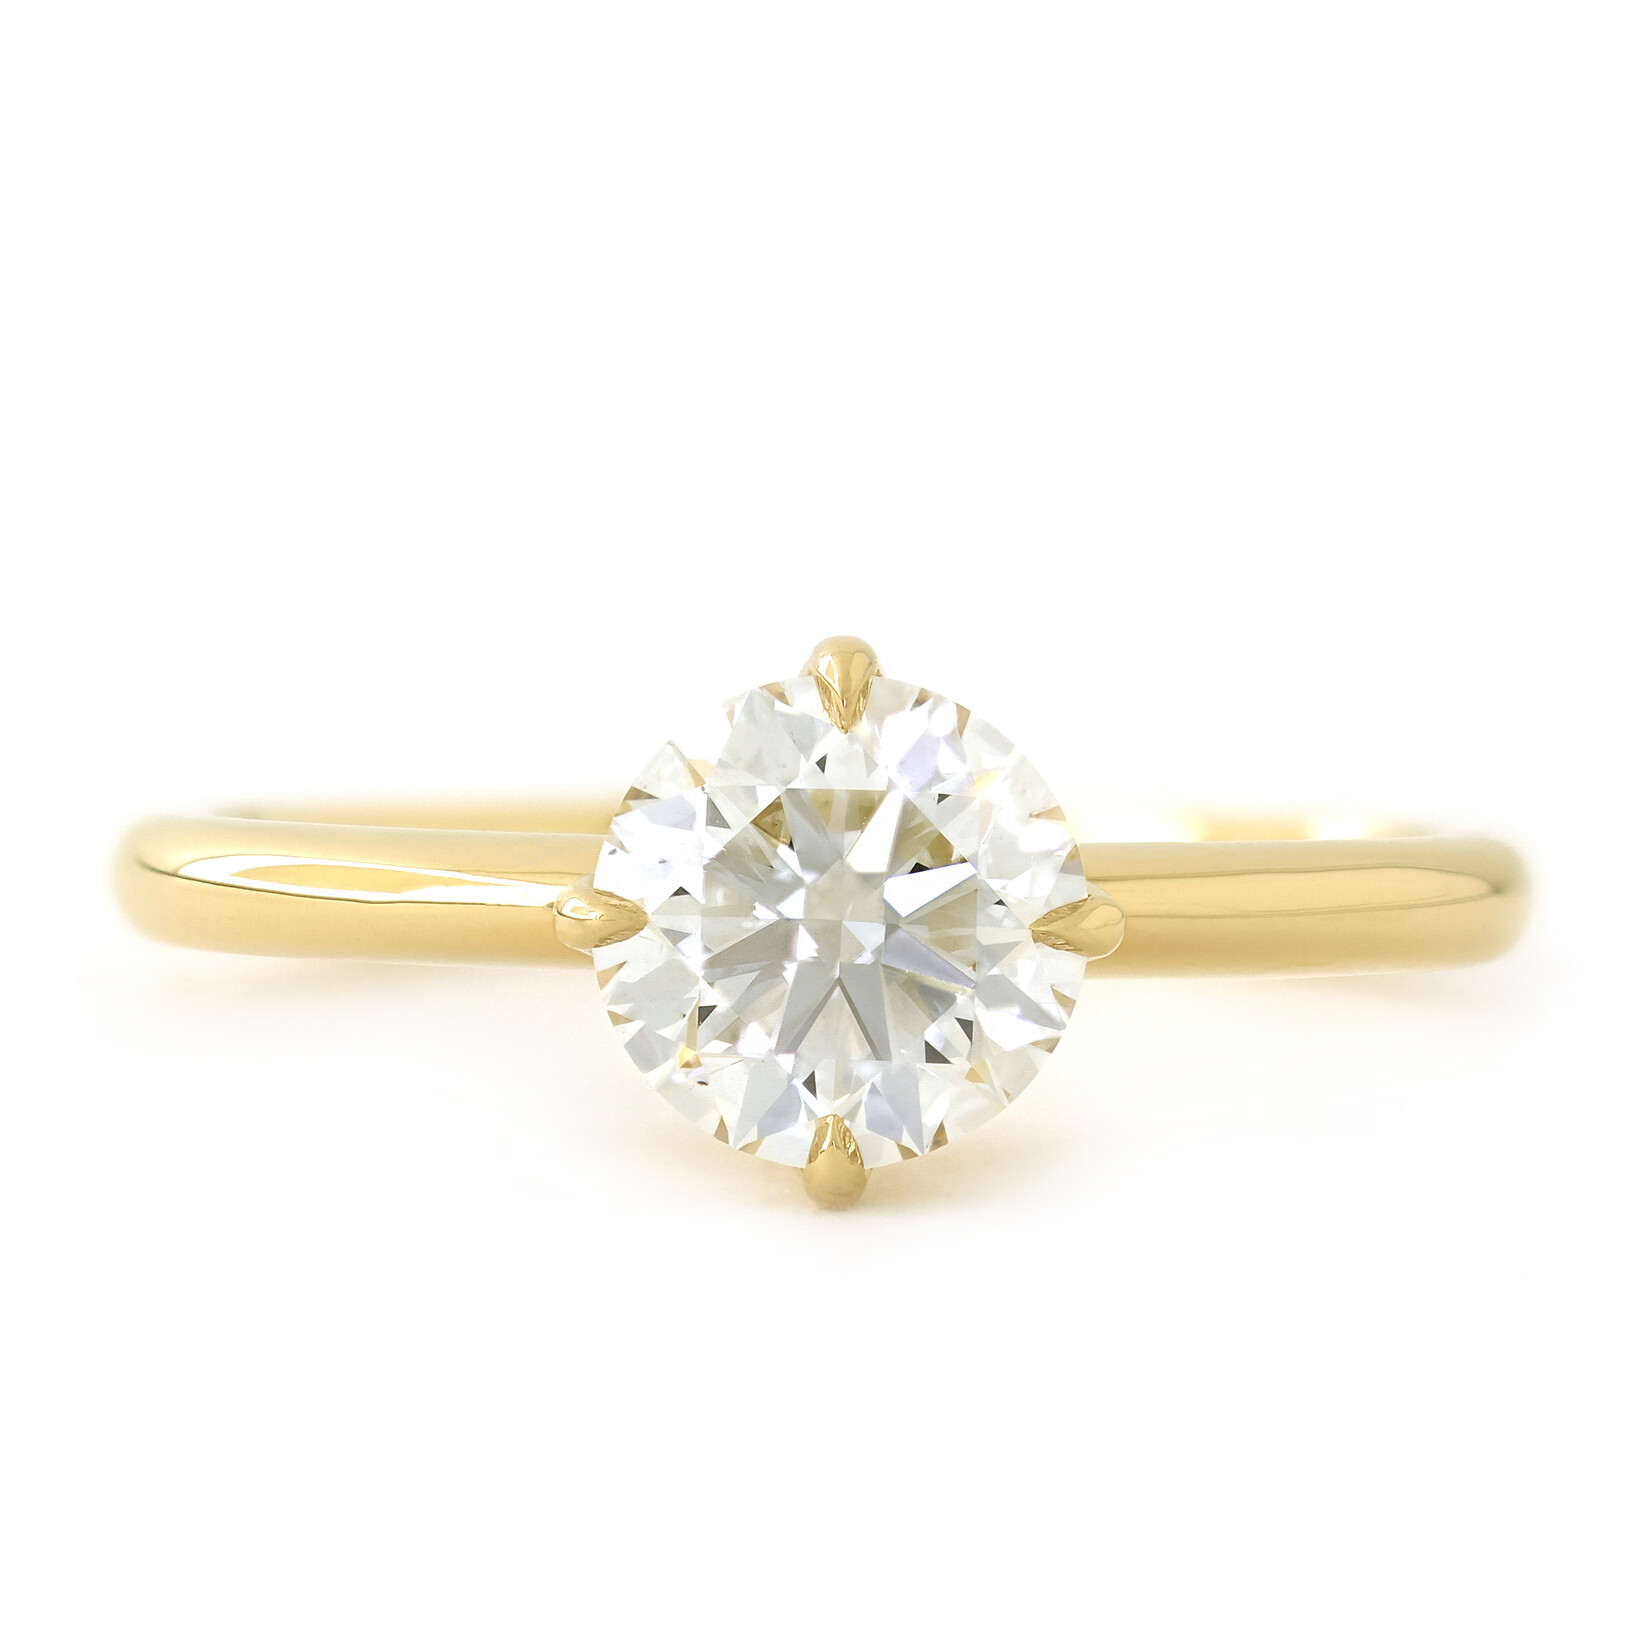 Baxter Moerman Isla Solitaire Ring with 1.20ct Diamond